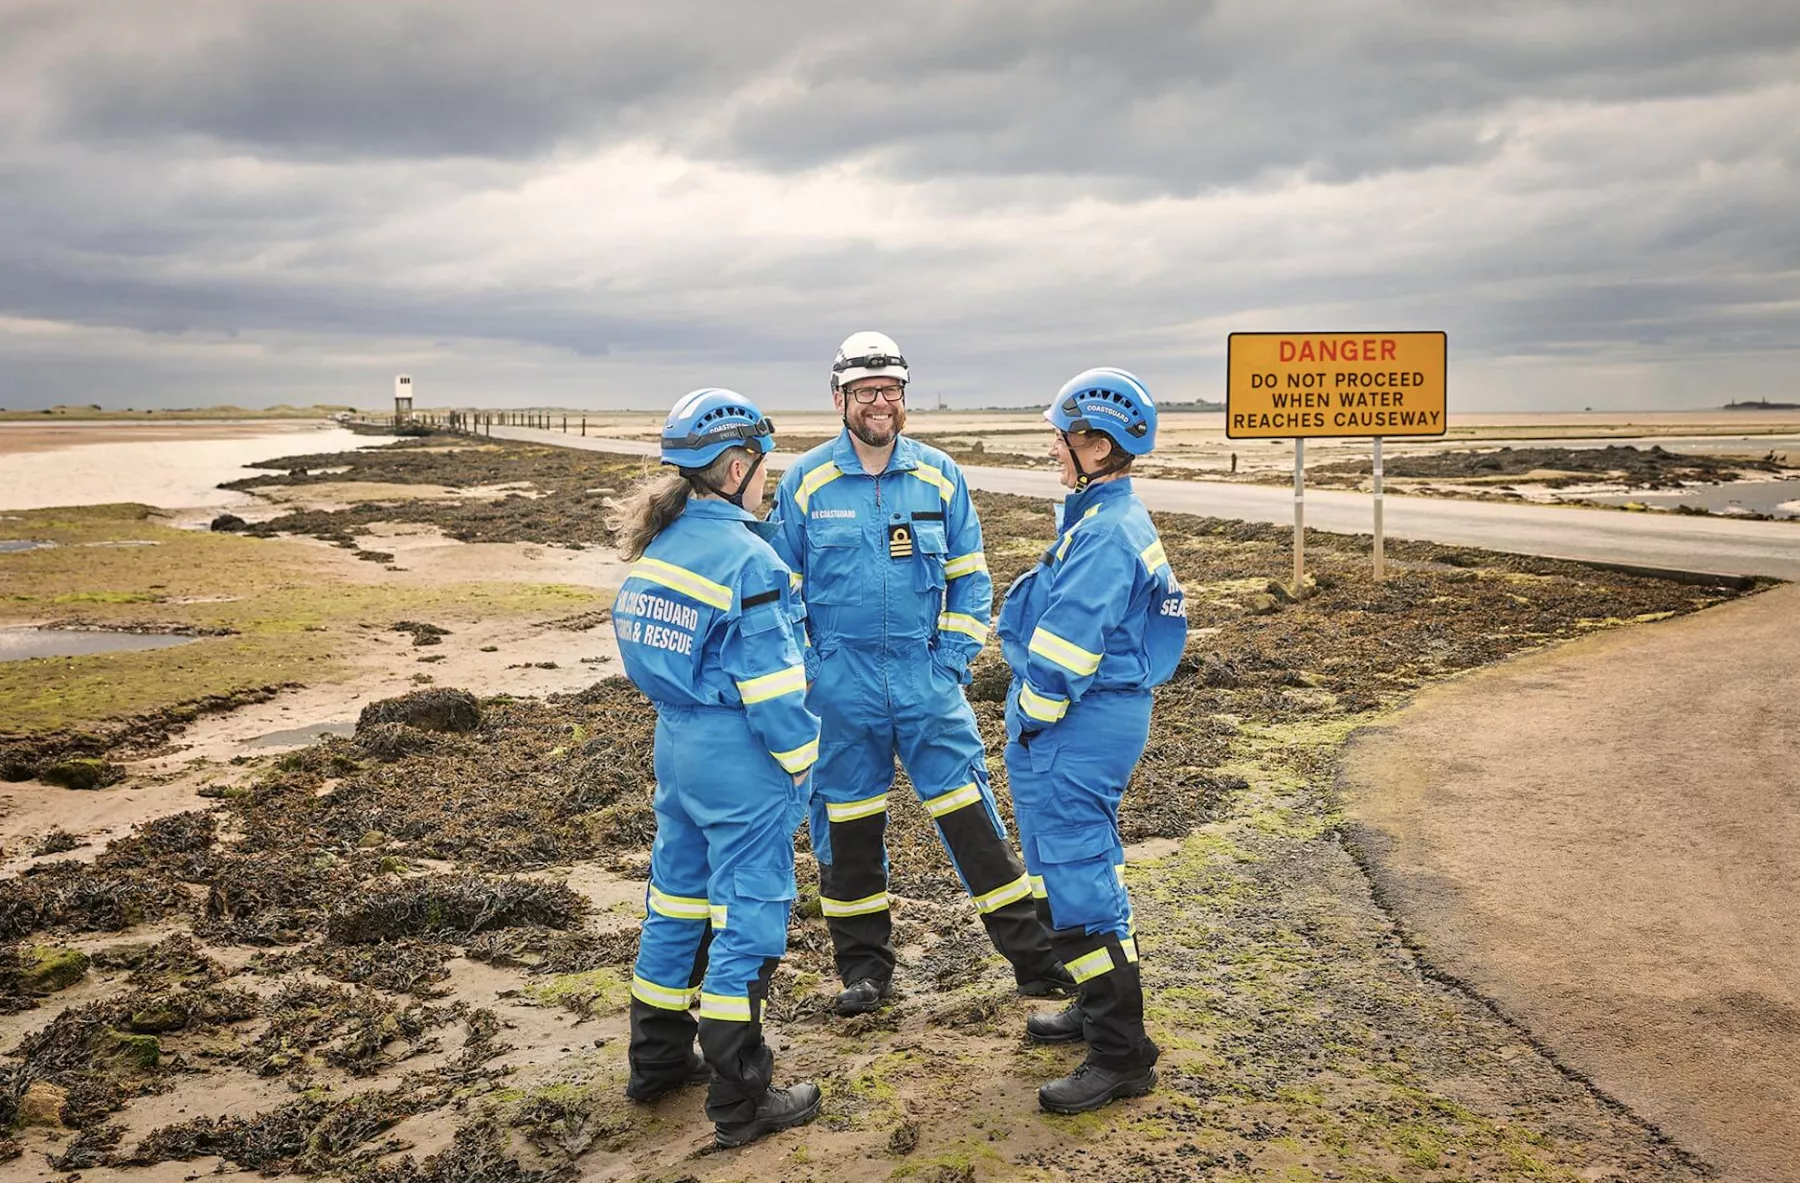 Three Coastguards stood facing each other, smiling, at Holy Island Causeway